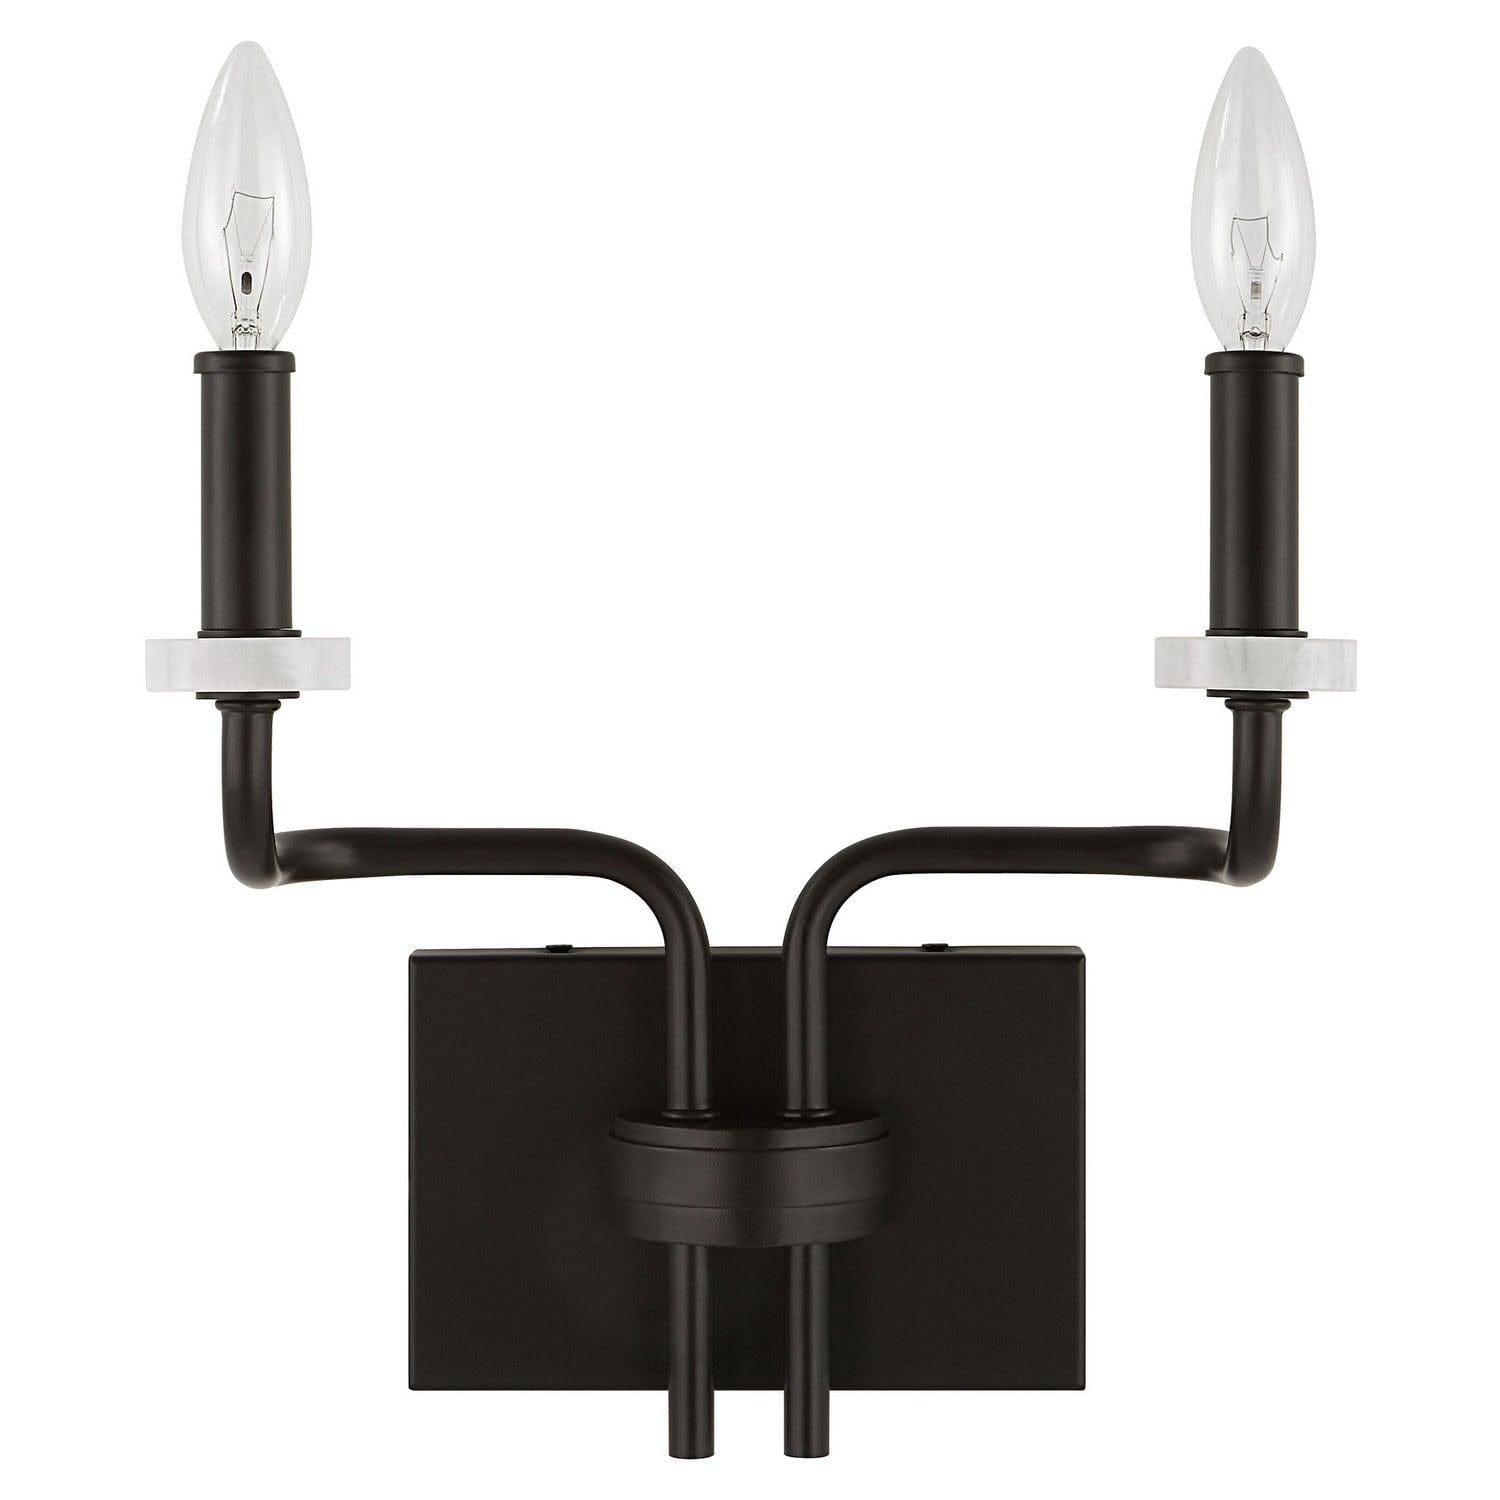 The Uttermost - Ebony Wall Sconce - 22551 | Montreal Lighting & Hardware